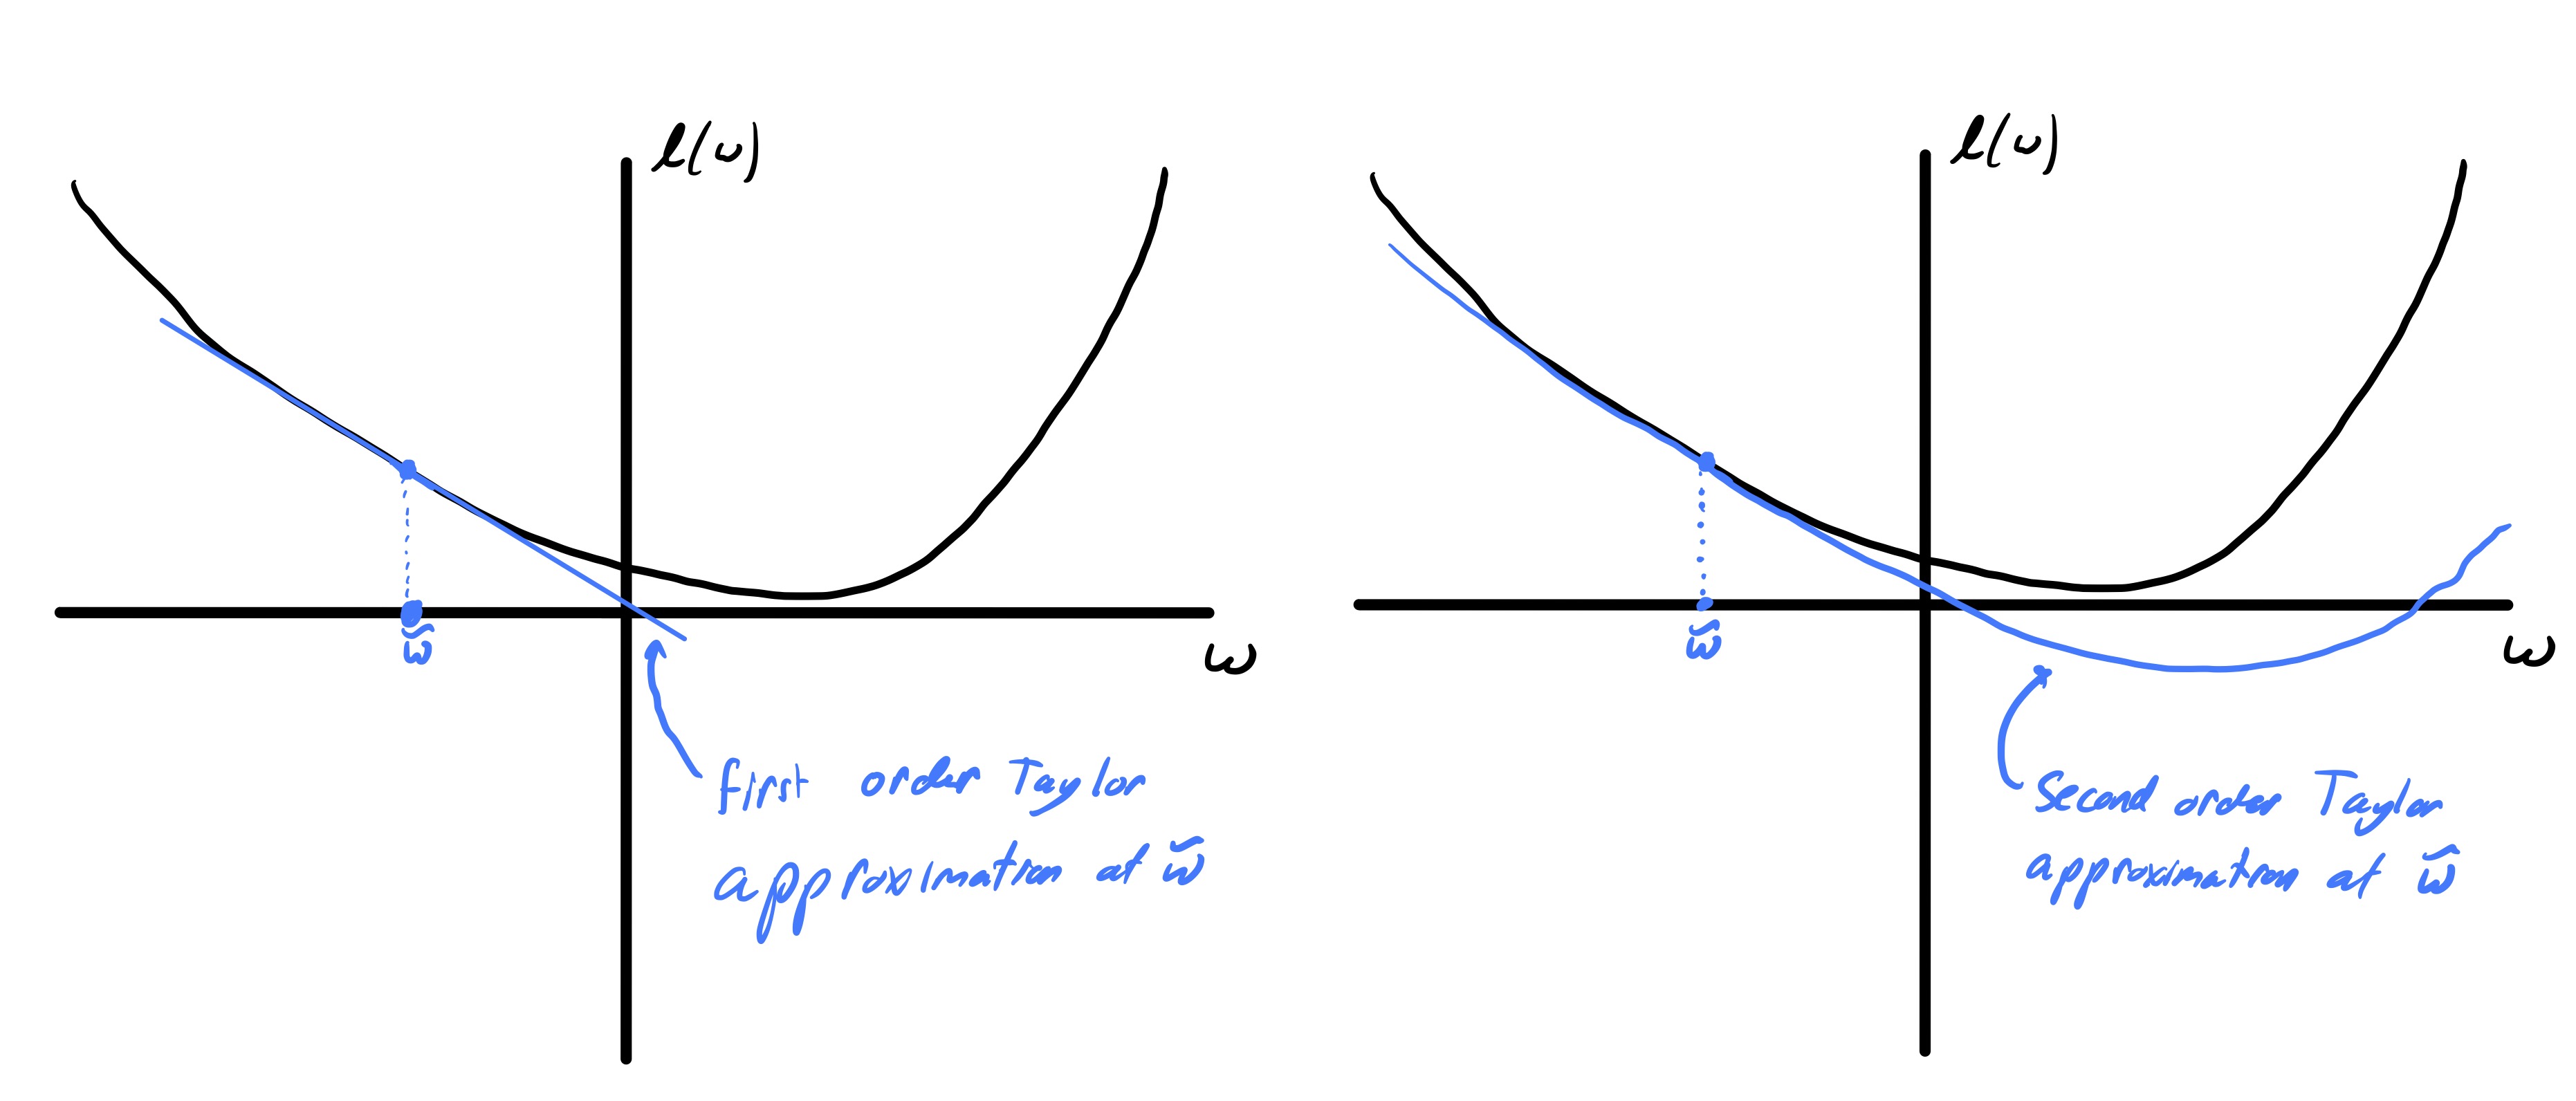 Figure 1: First and second order Taylor approximations.